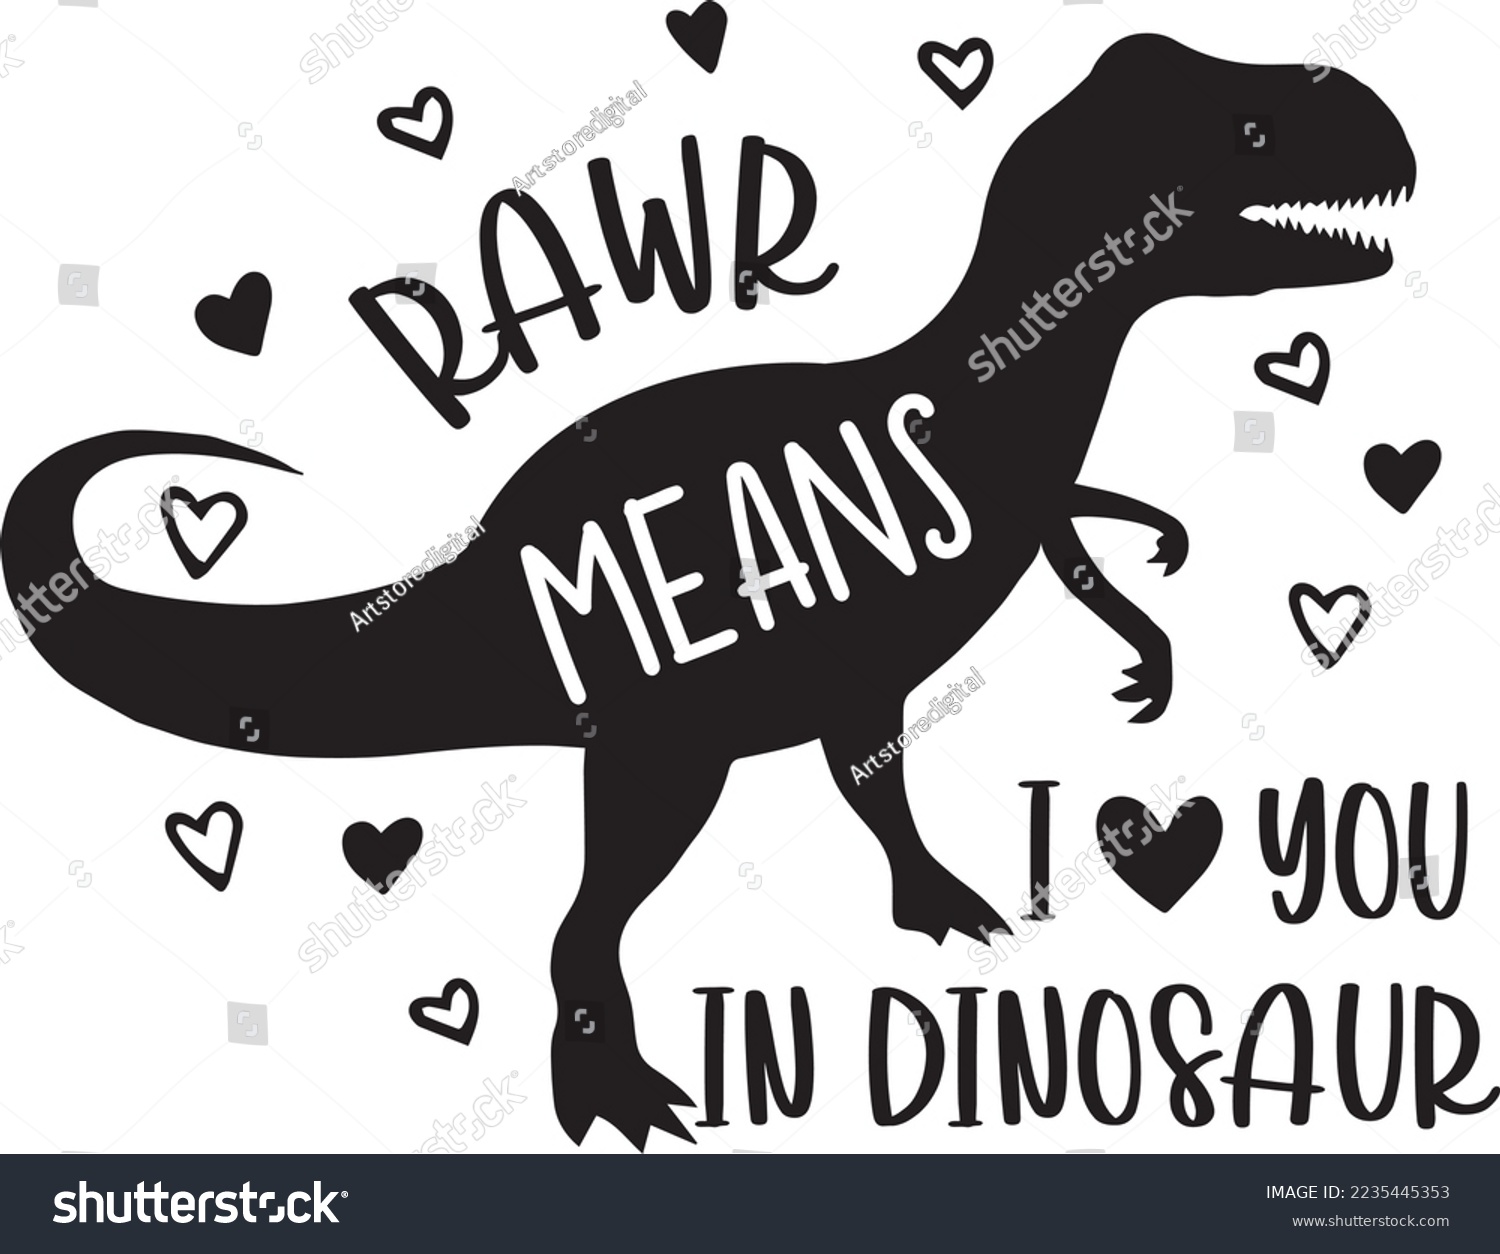 SVG of Rawr Means I Love You in Dinosaur, Valentines Day, Heart, Love, Be Mine, Holiday, Vector Illustration File svg